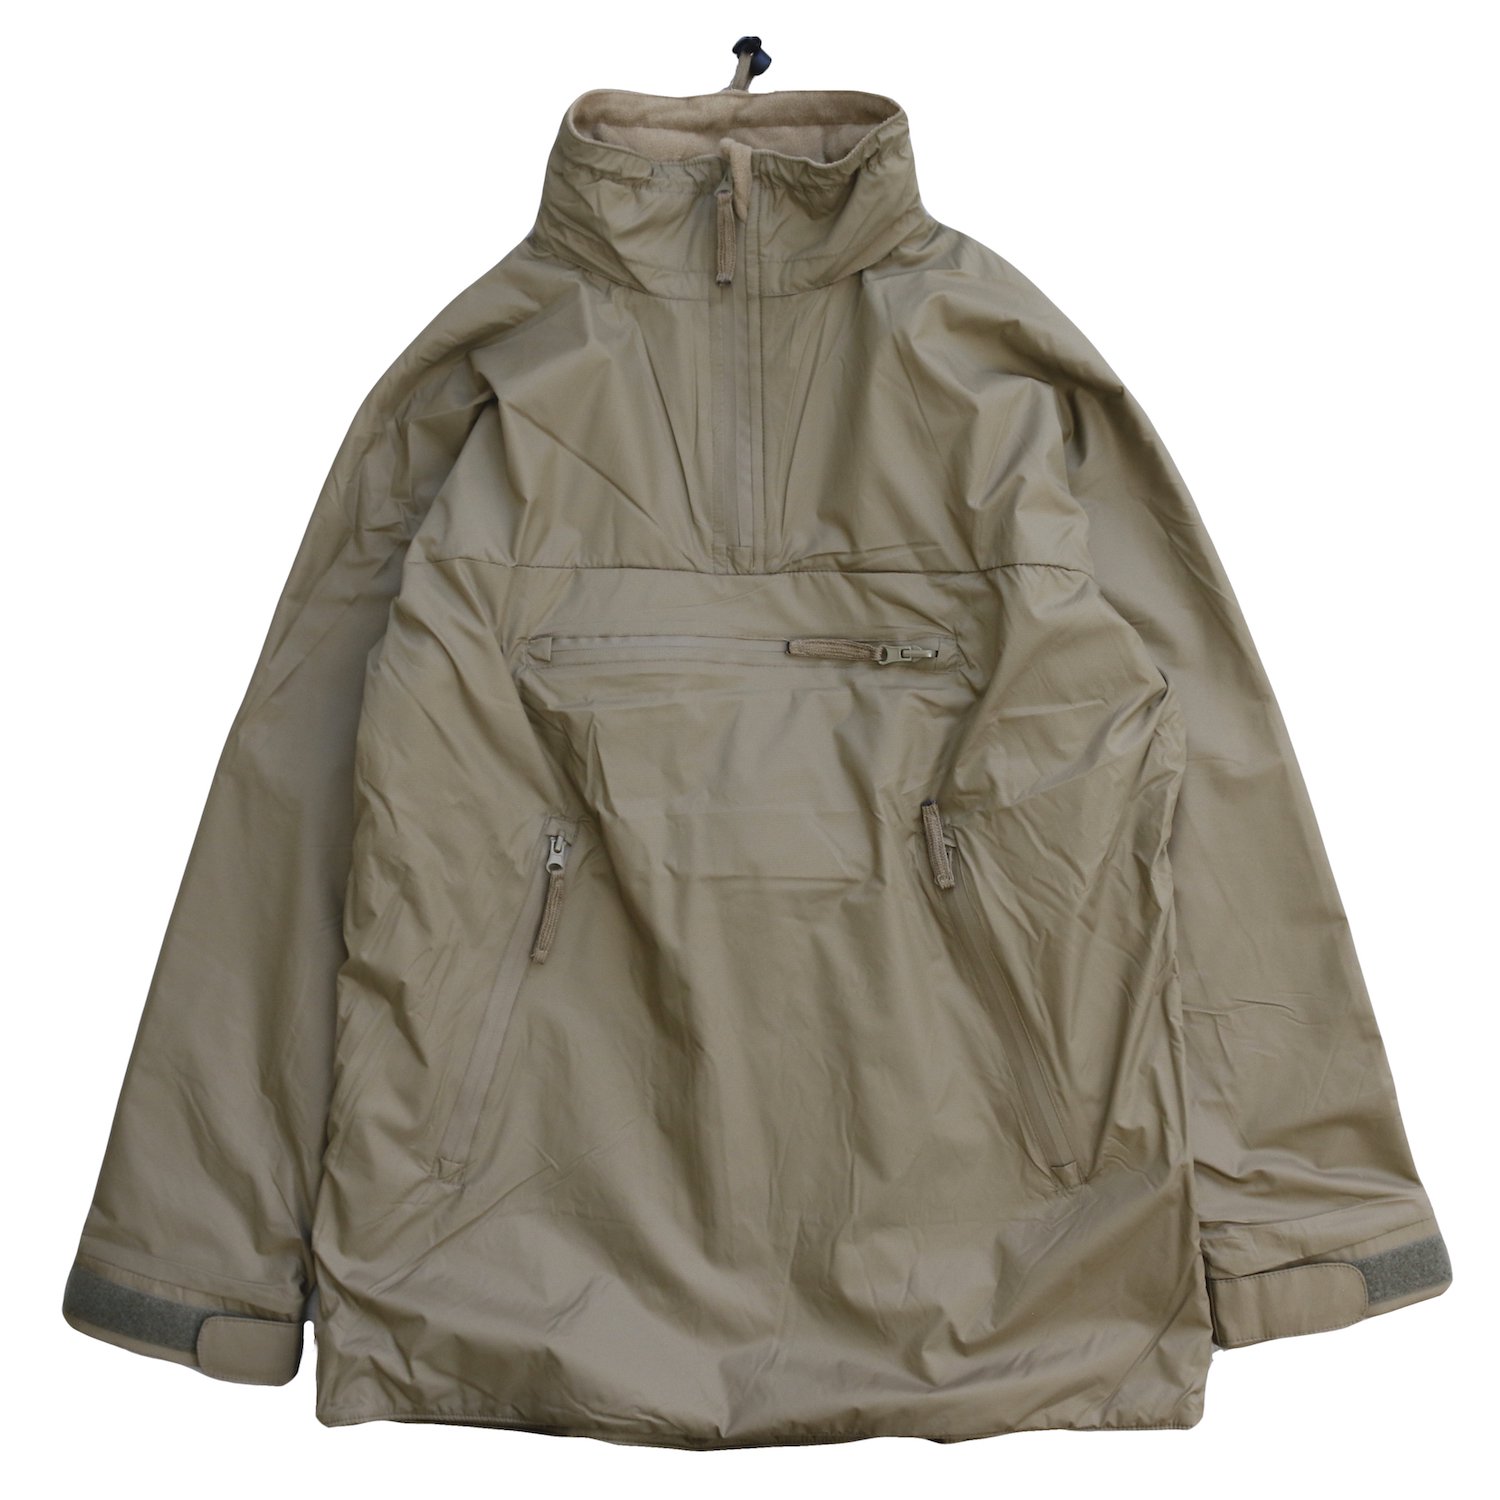 <img class='new_mark_img1' src='https://img.shop-pro.jp/img/new/icons8.gif' style='border:none;display:inline;margin:0px;padding:0px;width:auto;' />MILITARY / BRITISH ARMY DEADSTOCK SMOCK LIGHT WEIGHT THERMAL